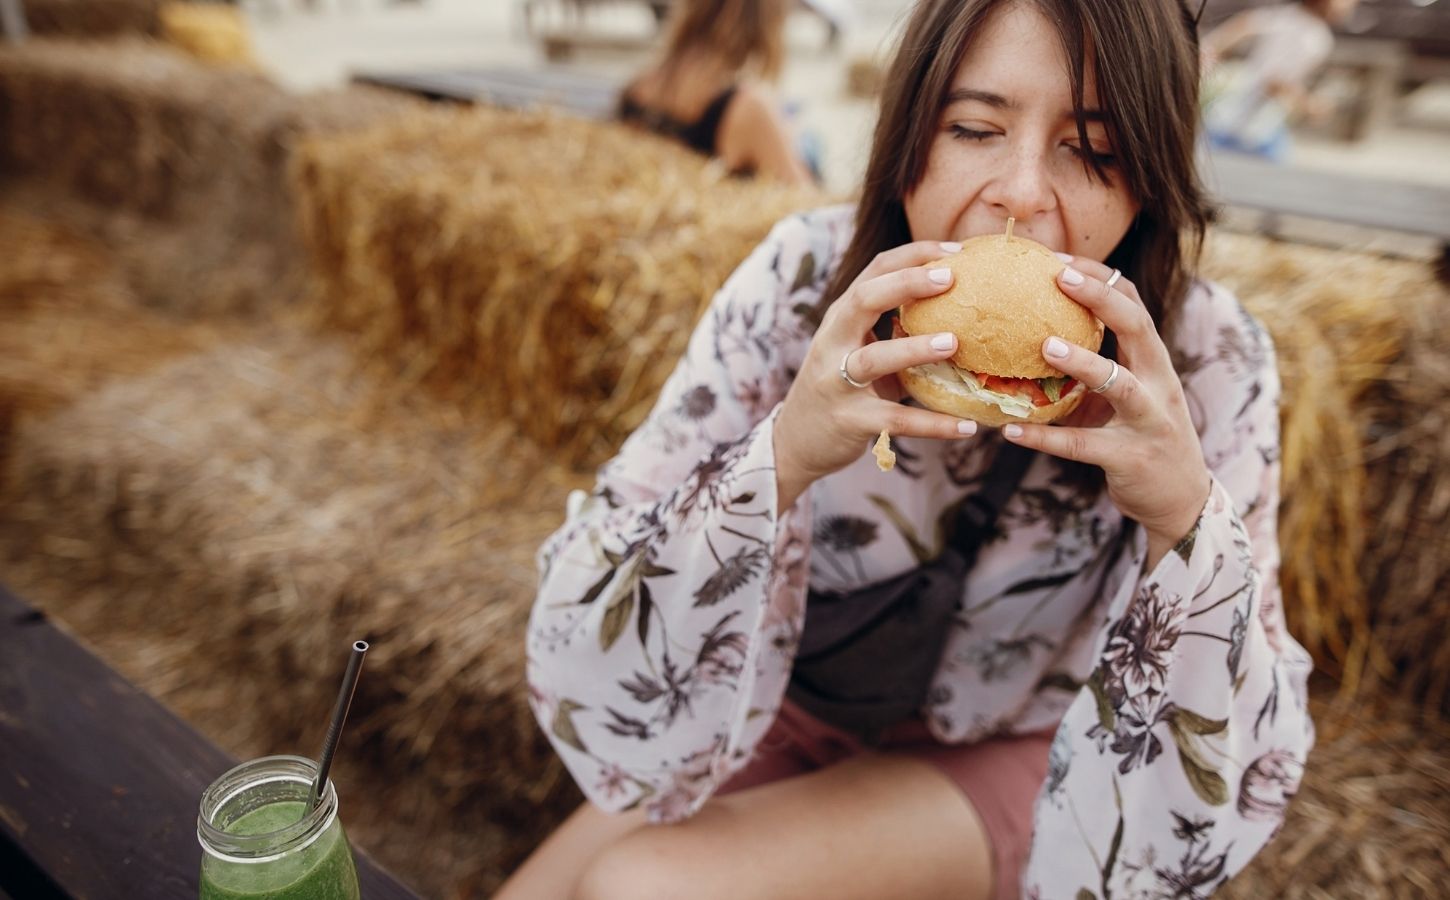 Photo shows a young woman sat on a hay bale and taking a bite out of a burger